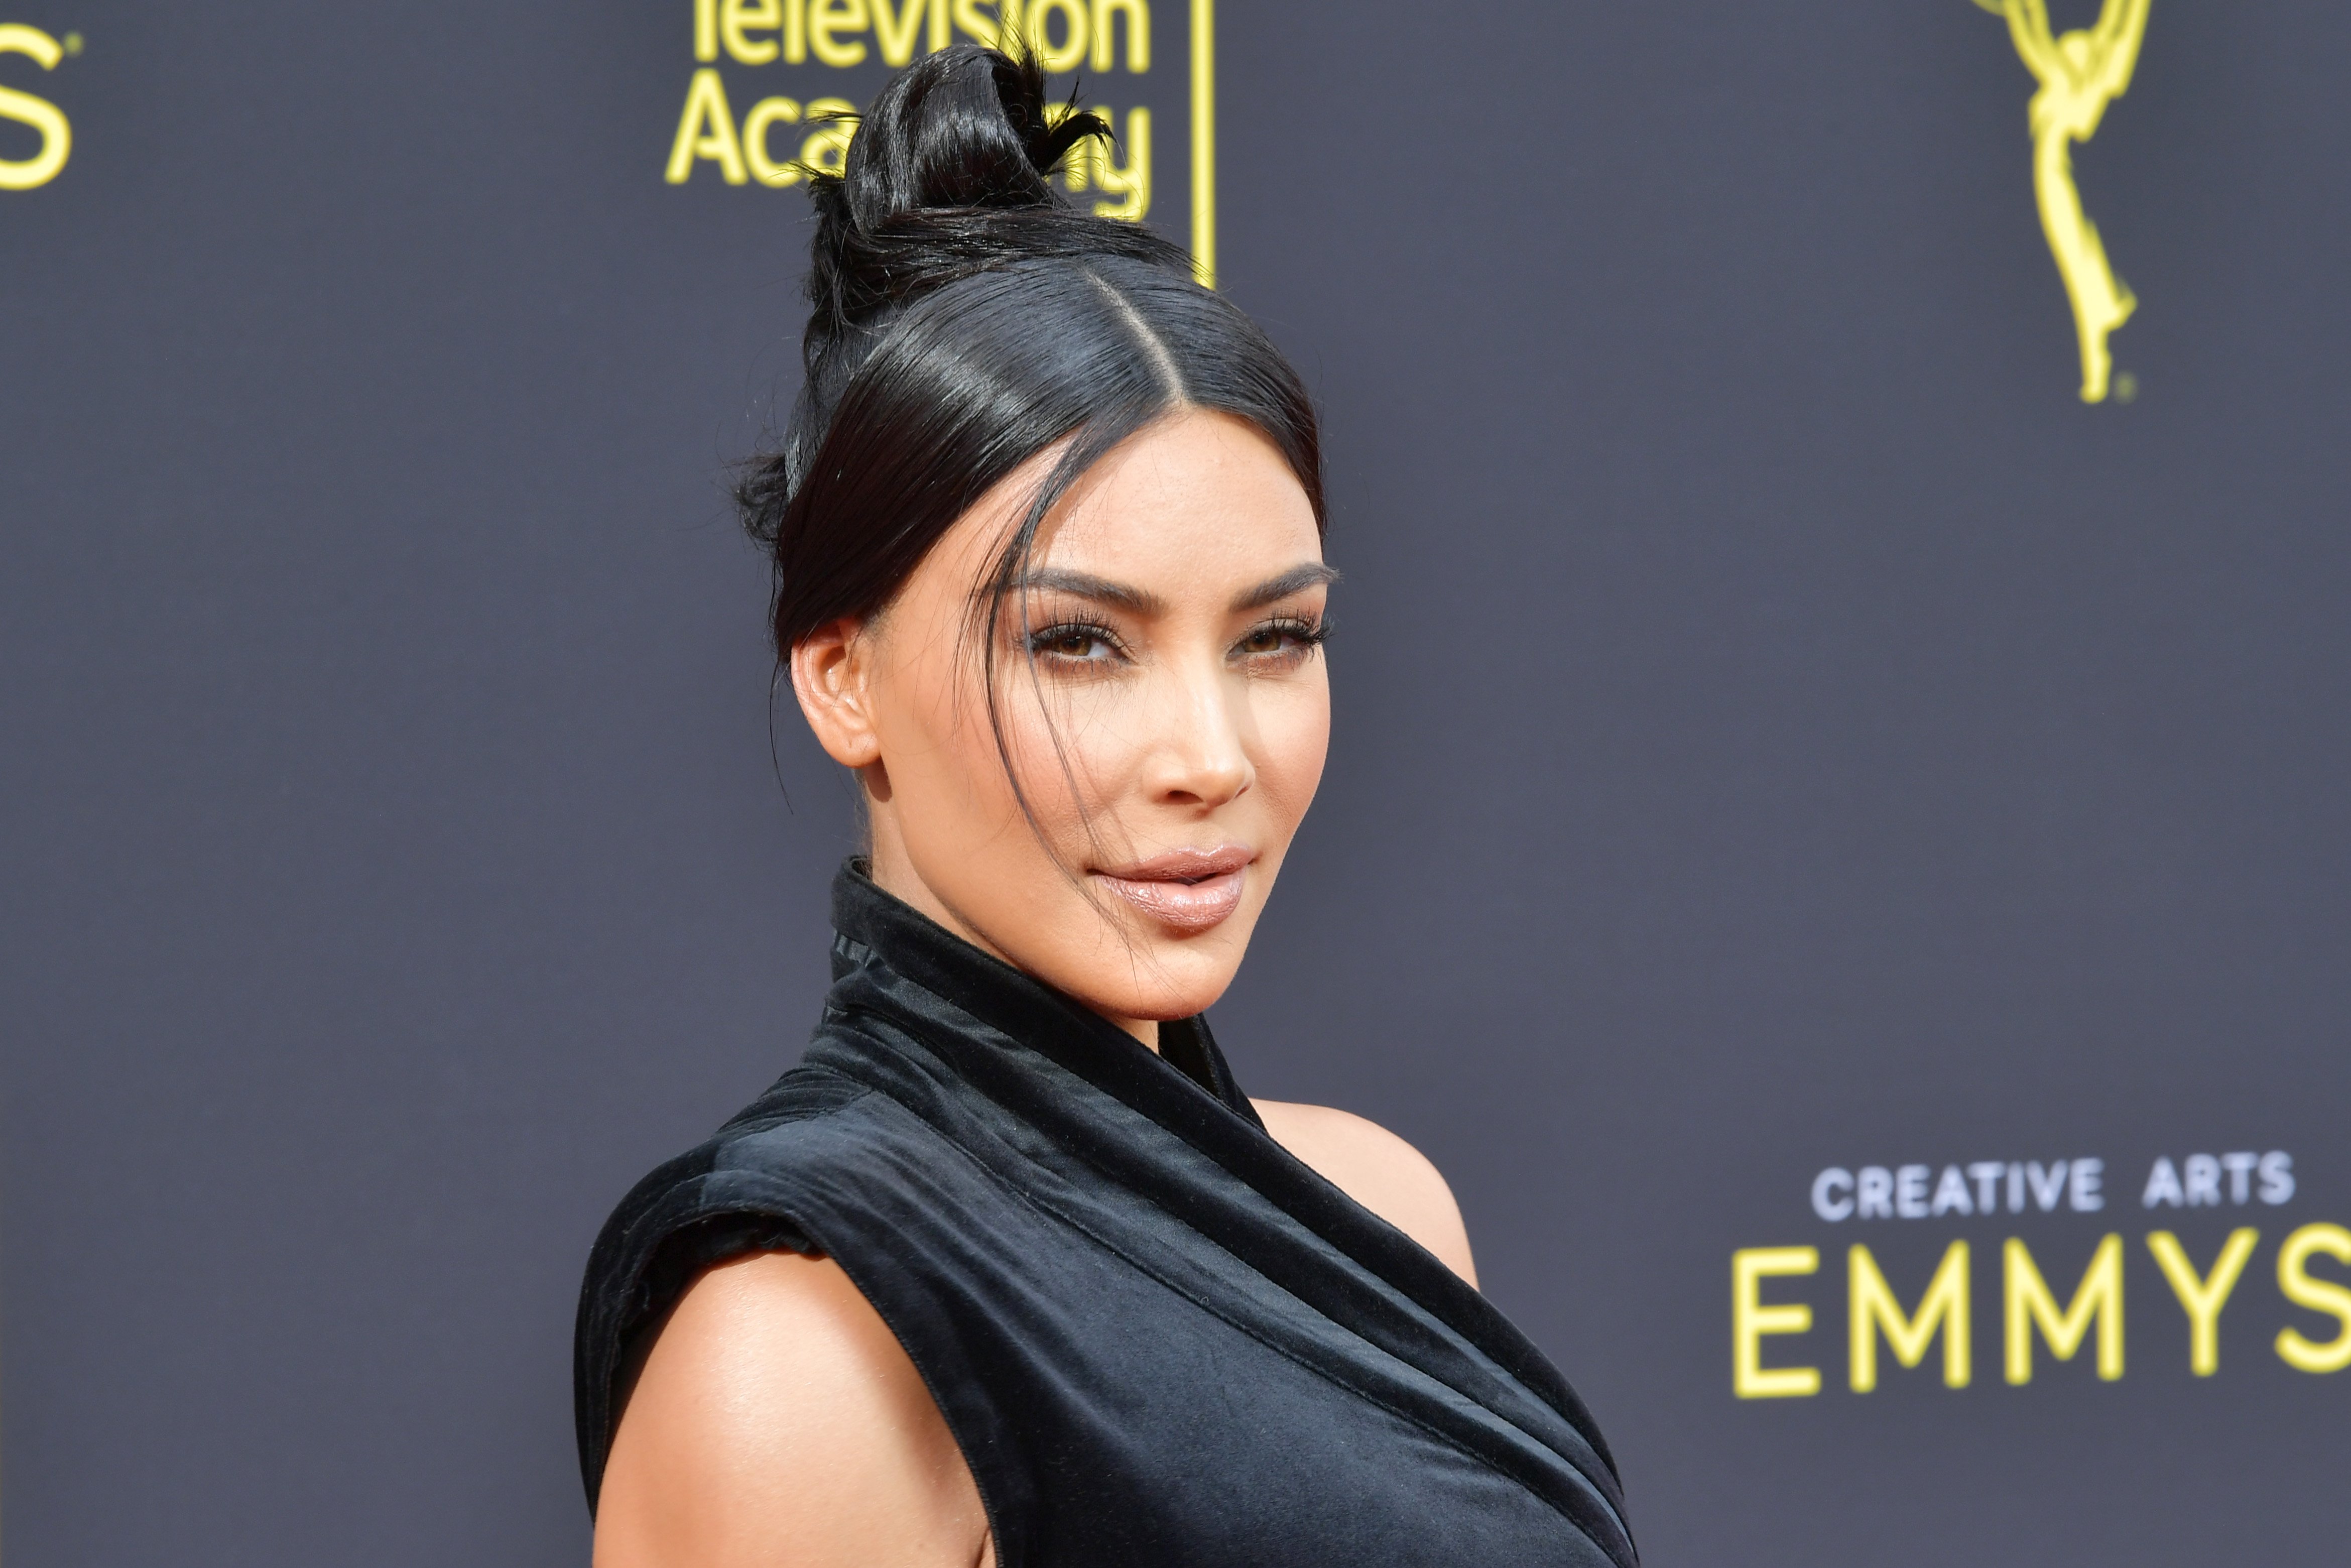 Kim Kardashian West at the 2019 Creative Arts Emmy Awards on September 14, 2019 in Los Angeles, California.|Source: Getty Images